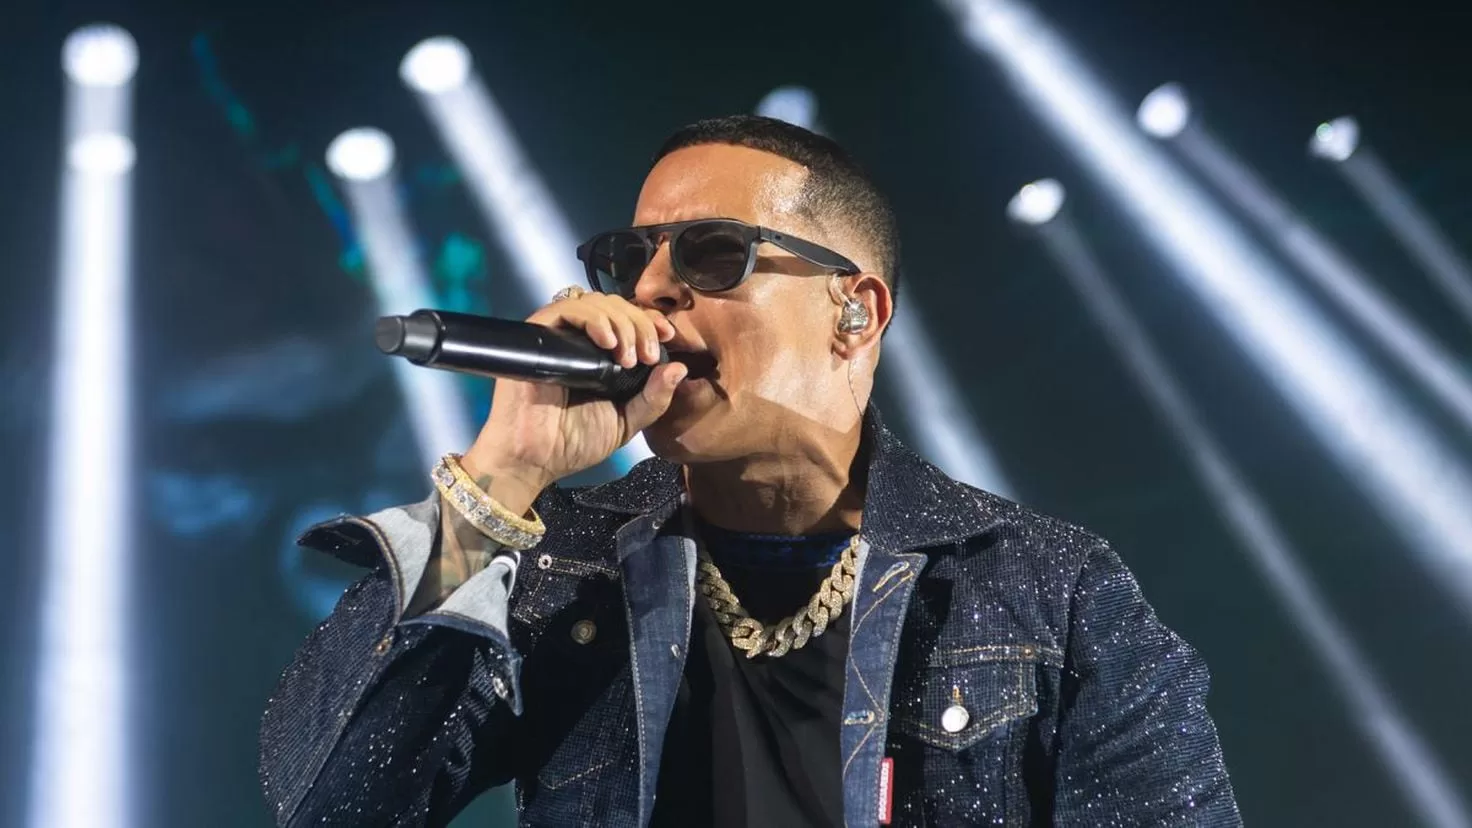 Daddy Yankee retires: We reached the goal
